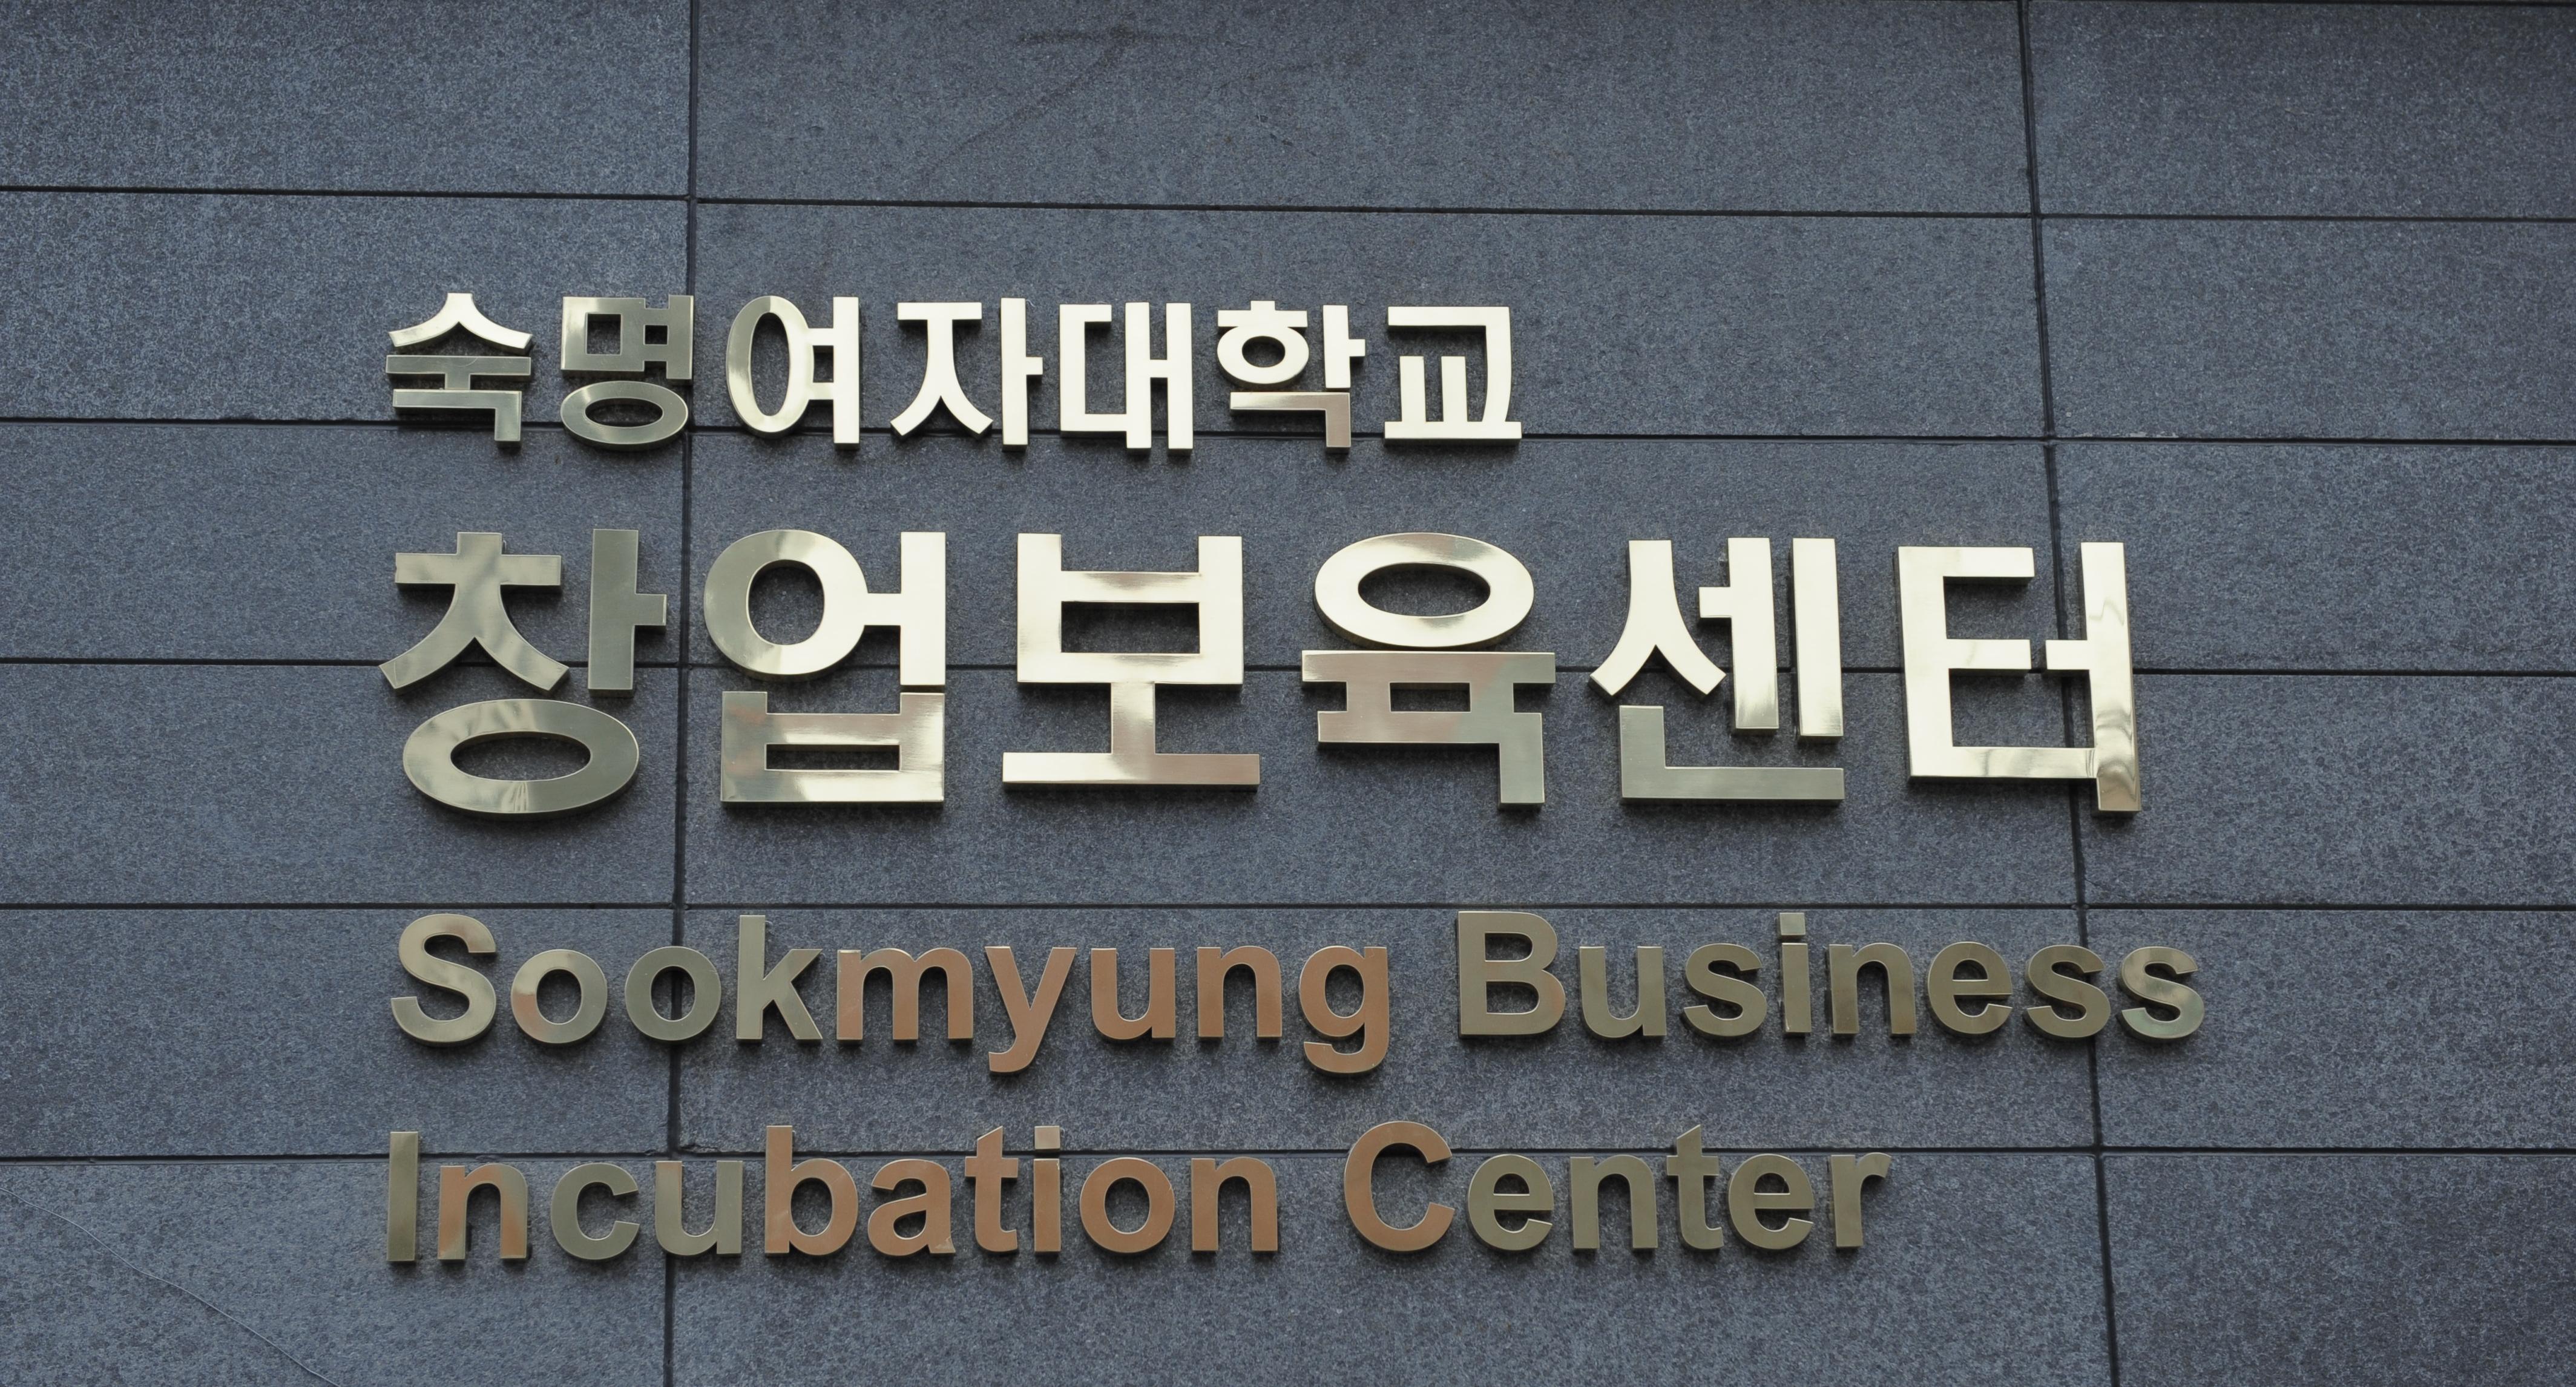 Sookmyung Business Incubation Center Selected as Central Seoul’s Base Business Center